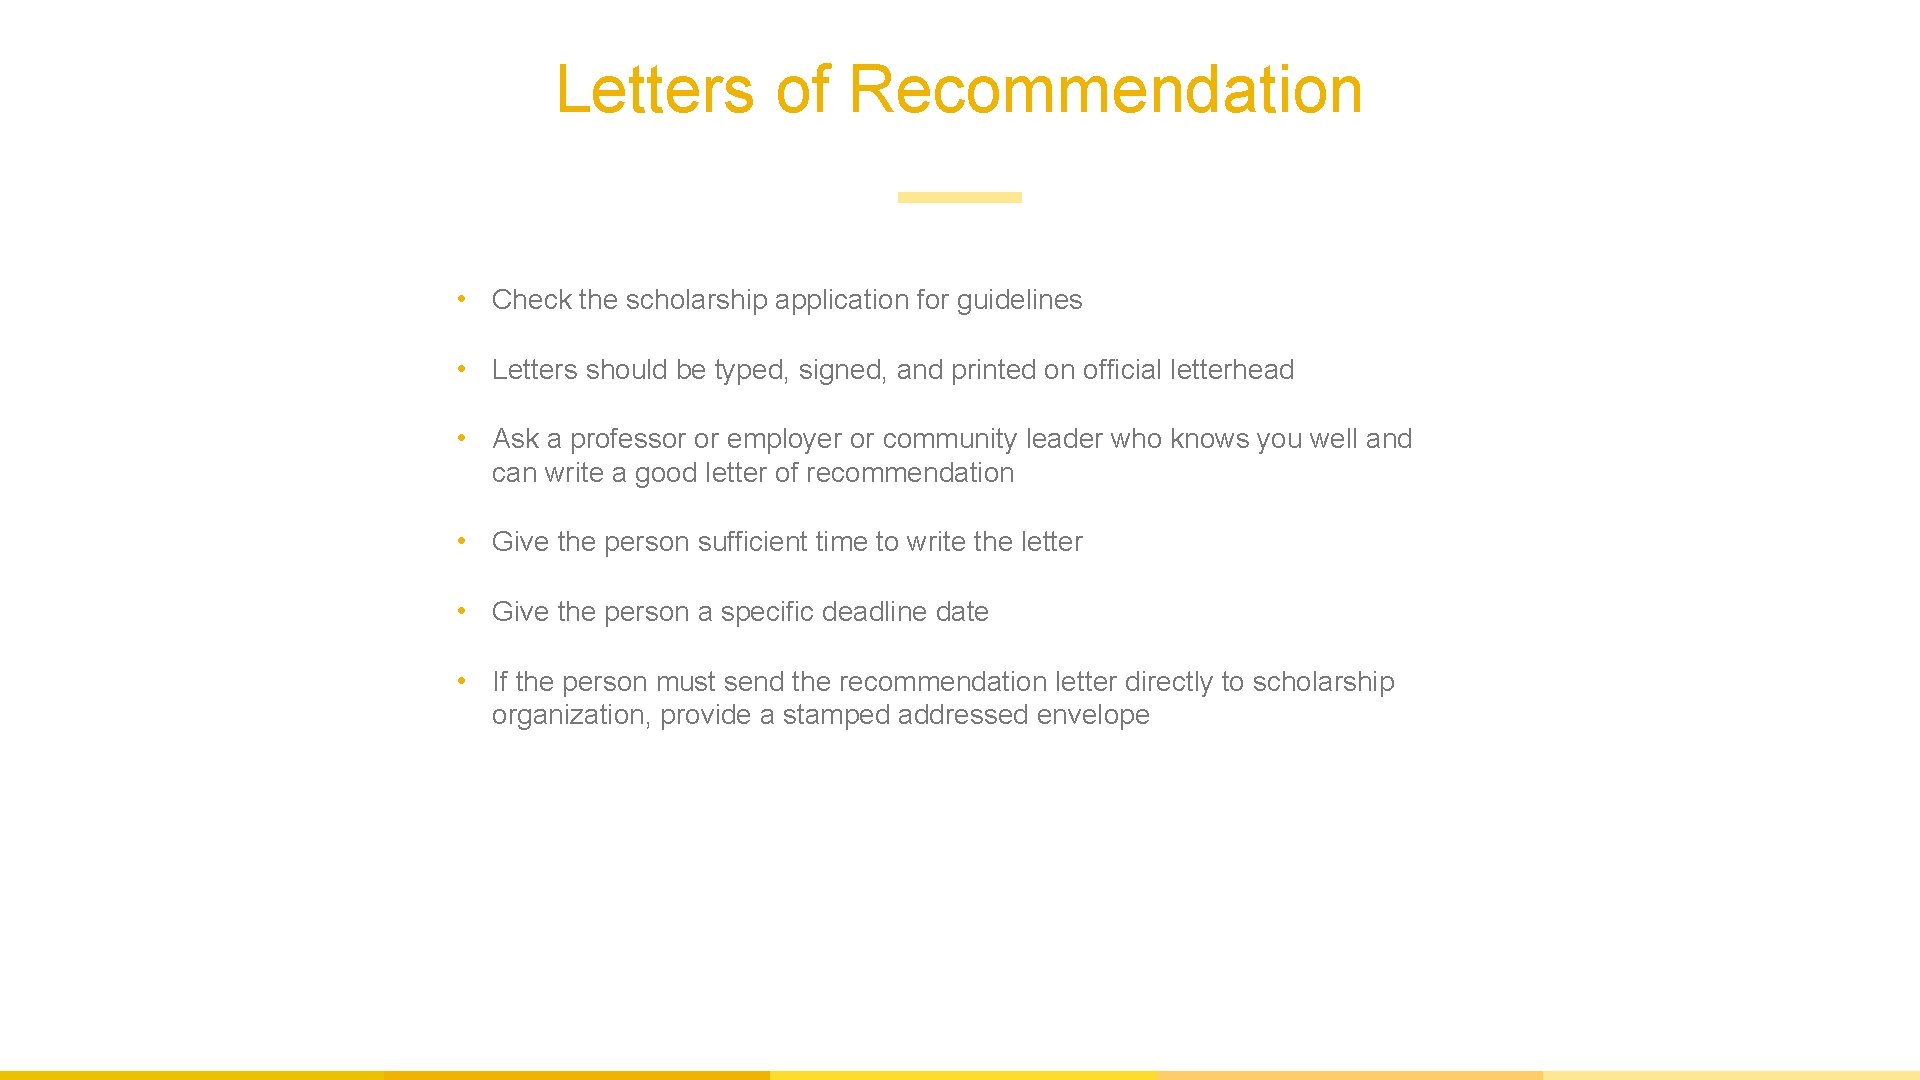 Letters of Recommendation • Check the scholarship application for guidelines • Letters should be